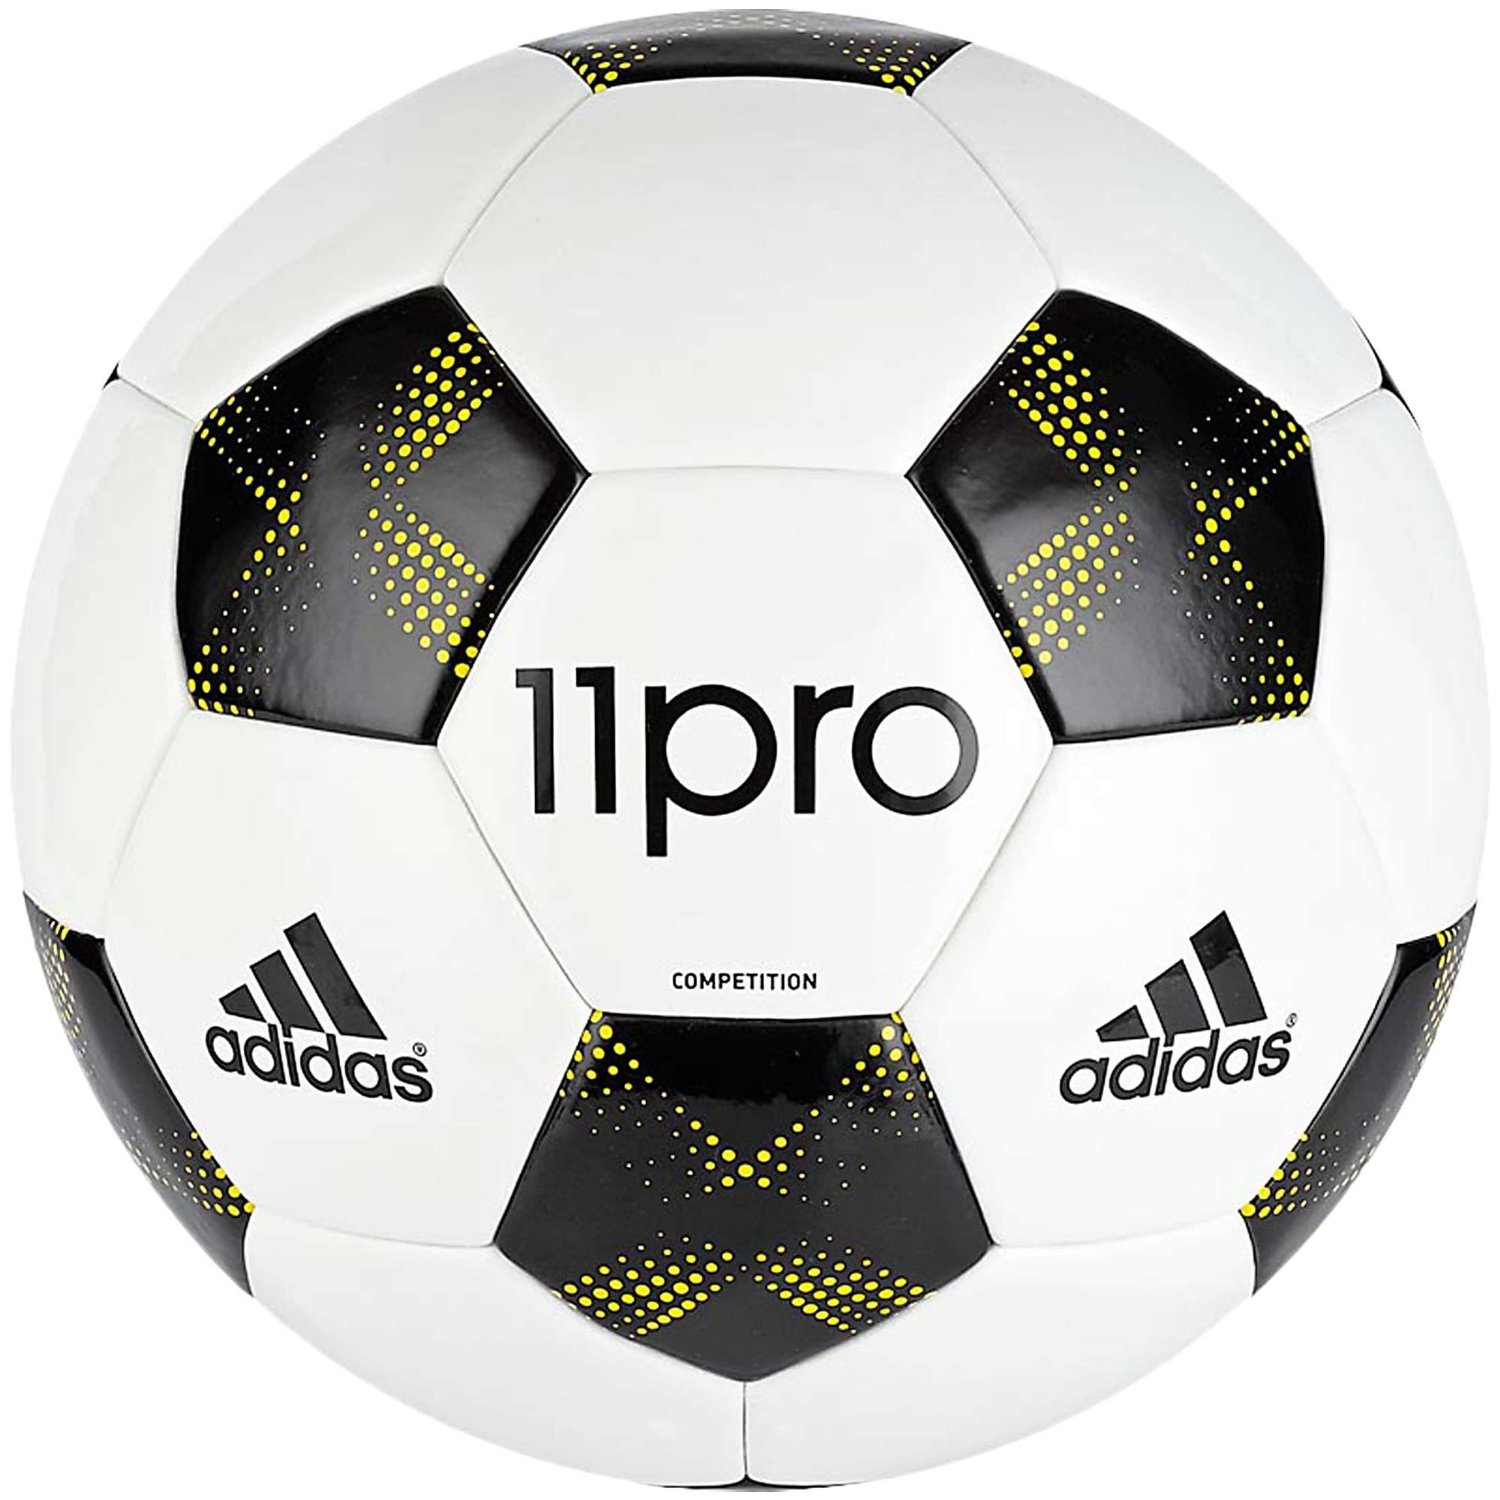 Adidas 11Pro Competition Nfhs Soccer Ball